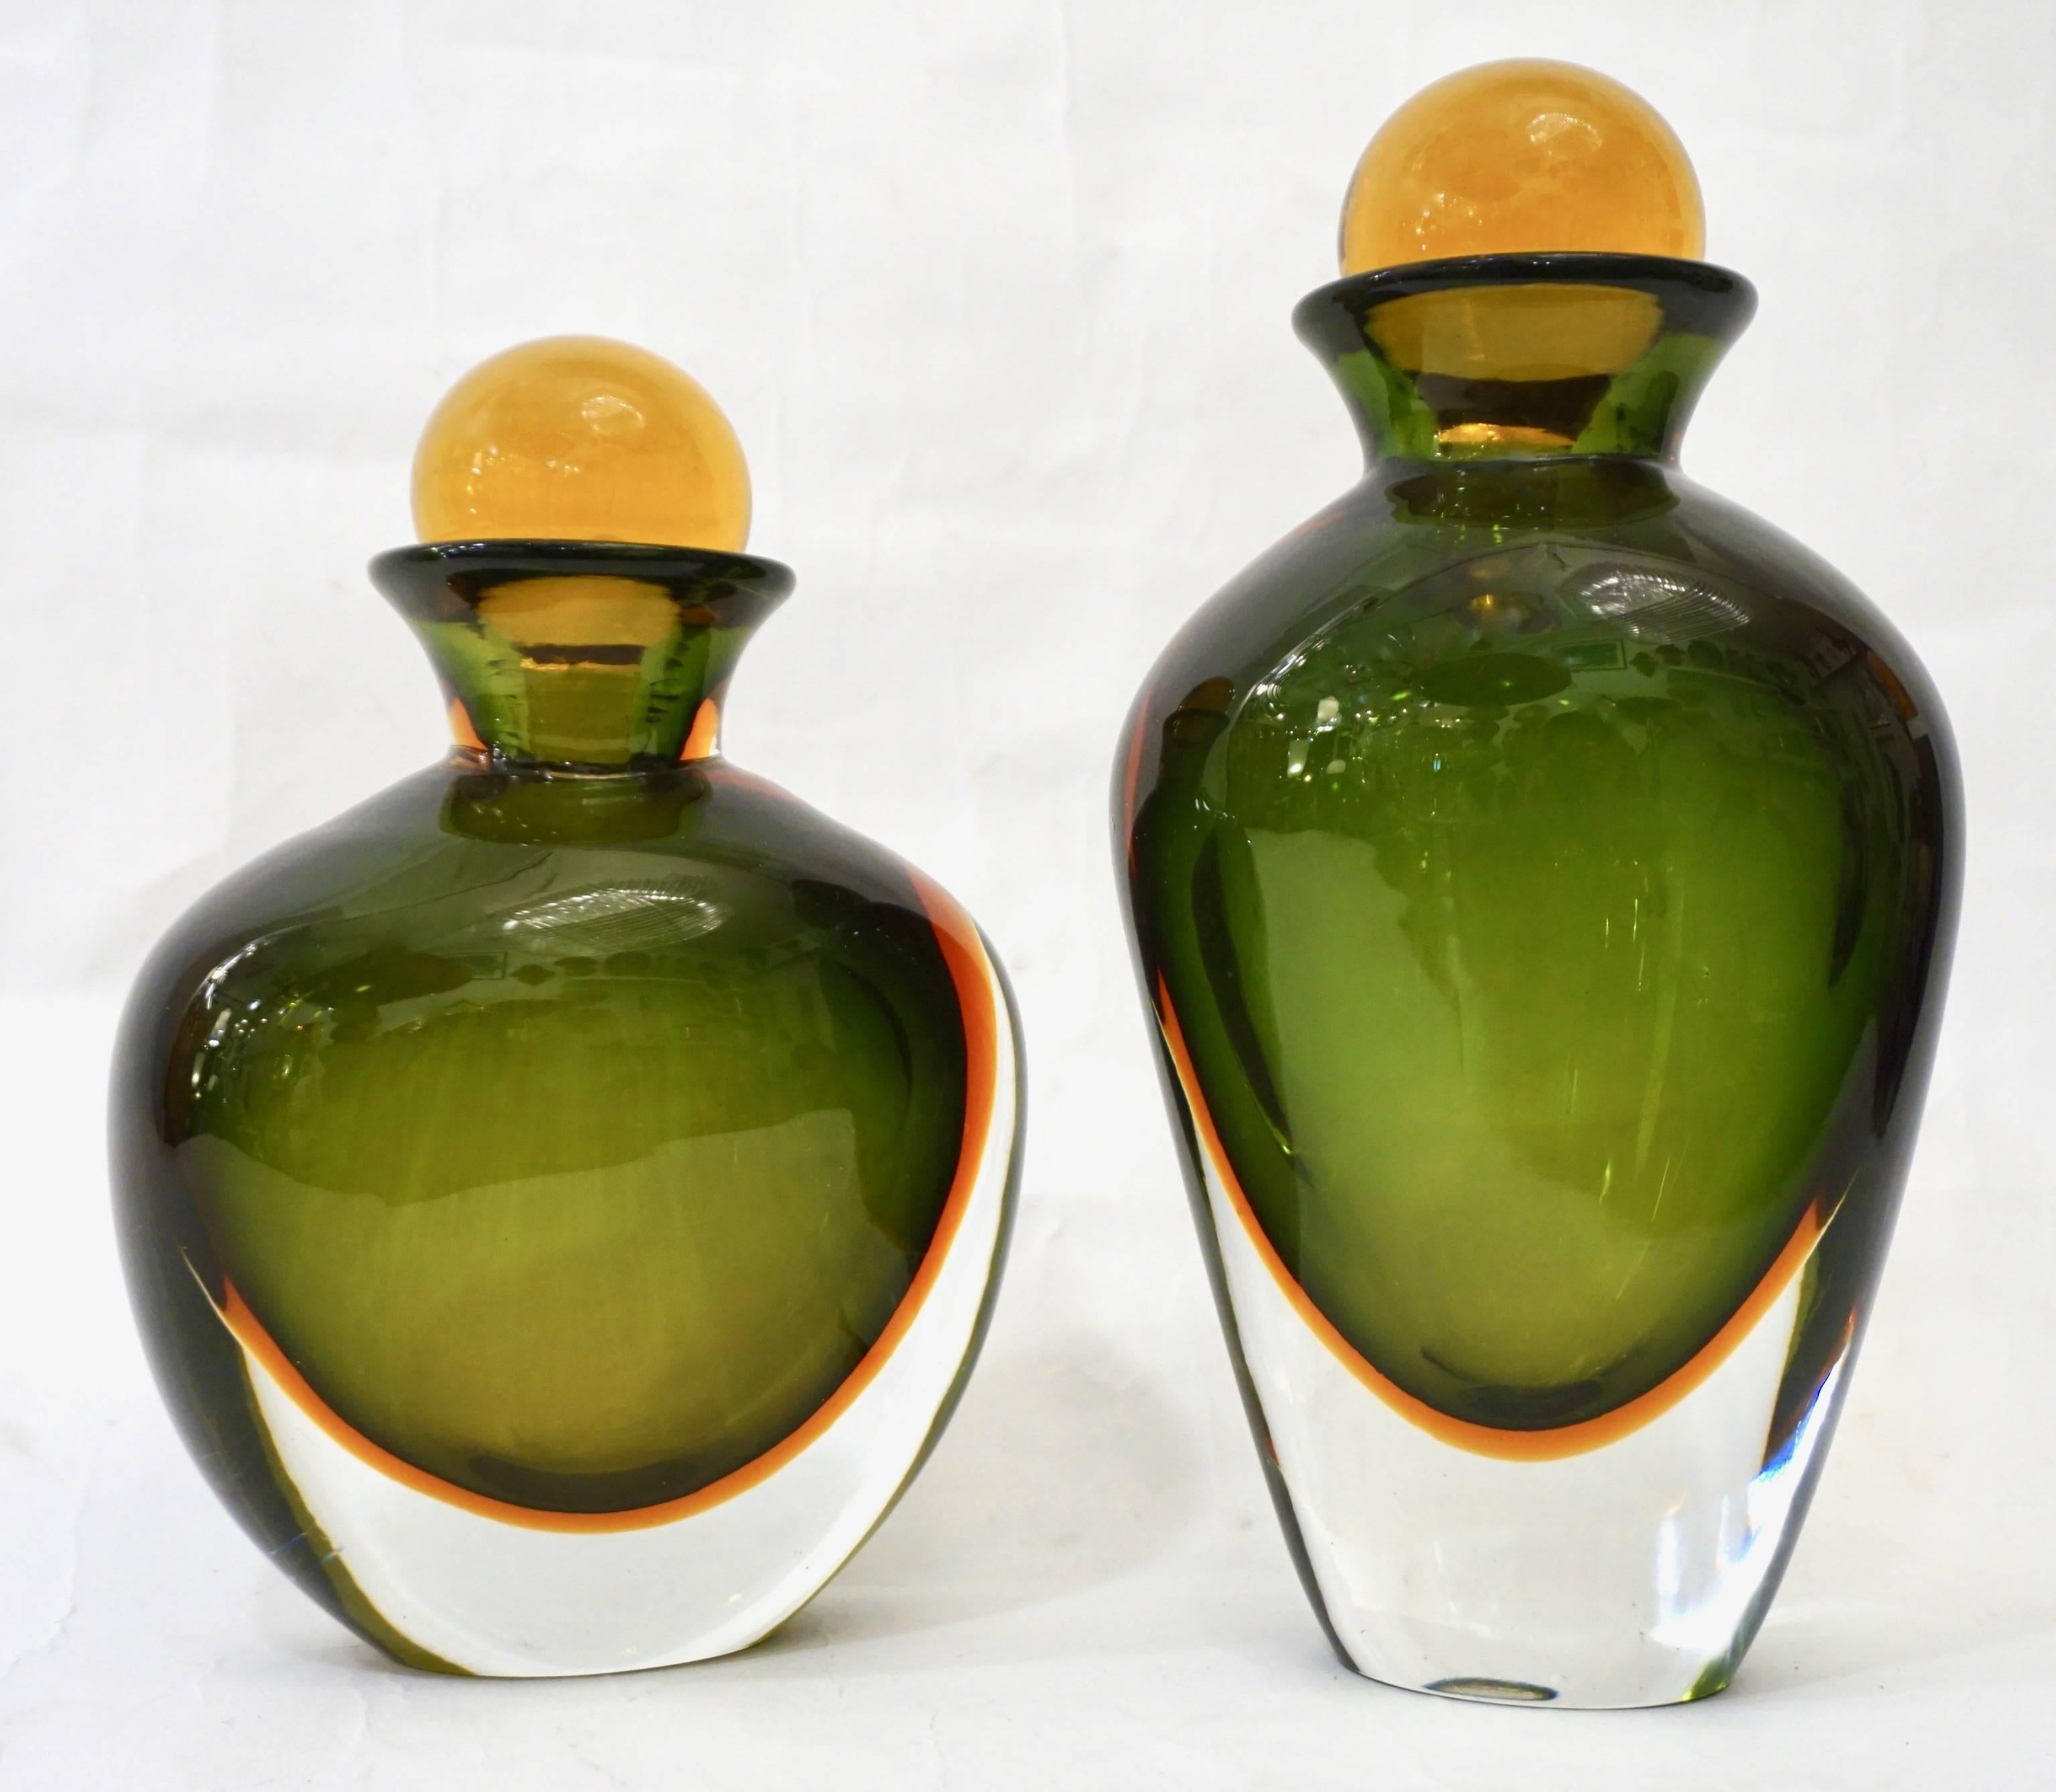 1980s rare Italian set of two ovoid shape bottles with yellow solid stoppers in Murano glass by Formia, beautiful and sophisticated Venetian decoration with the Sommerso technique, the green body encased in the lower part with an orange colored